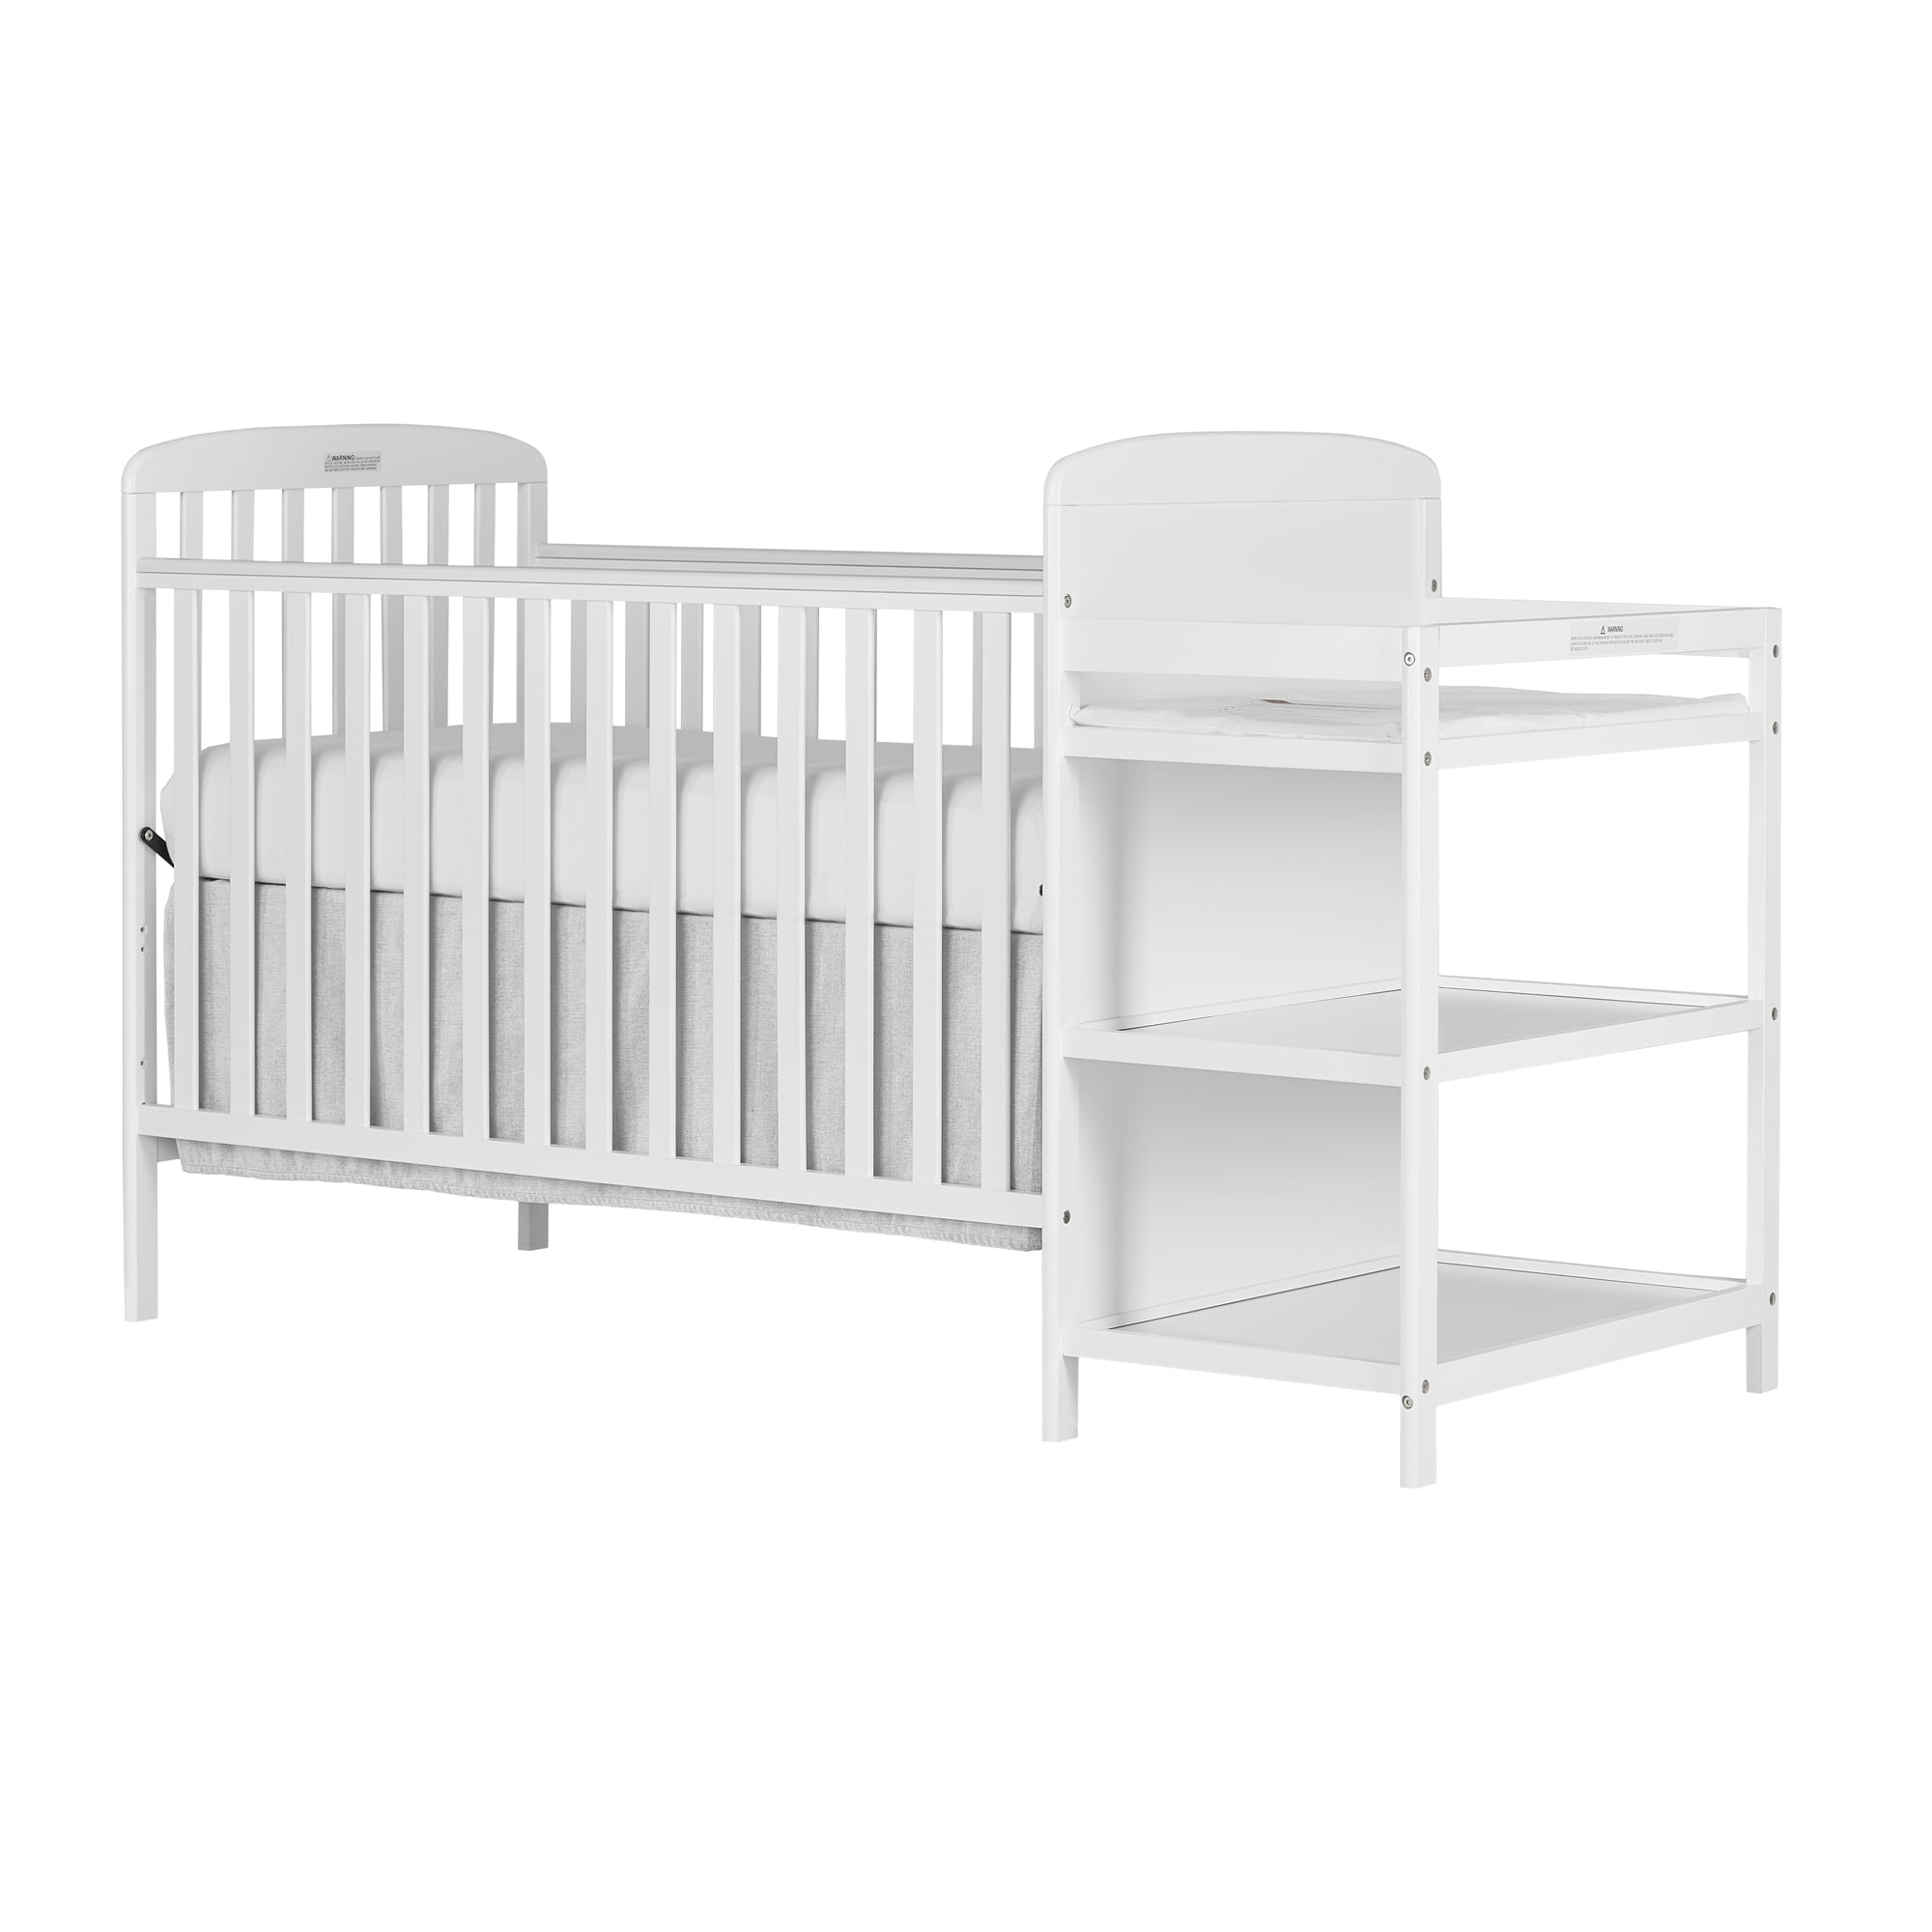 Dream On Me Anna 3-in-1 Full Size Crib and Changing Table Combo in White - image 1 of 16